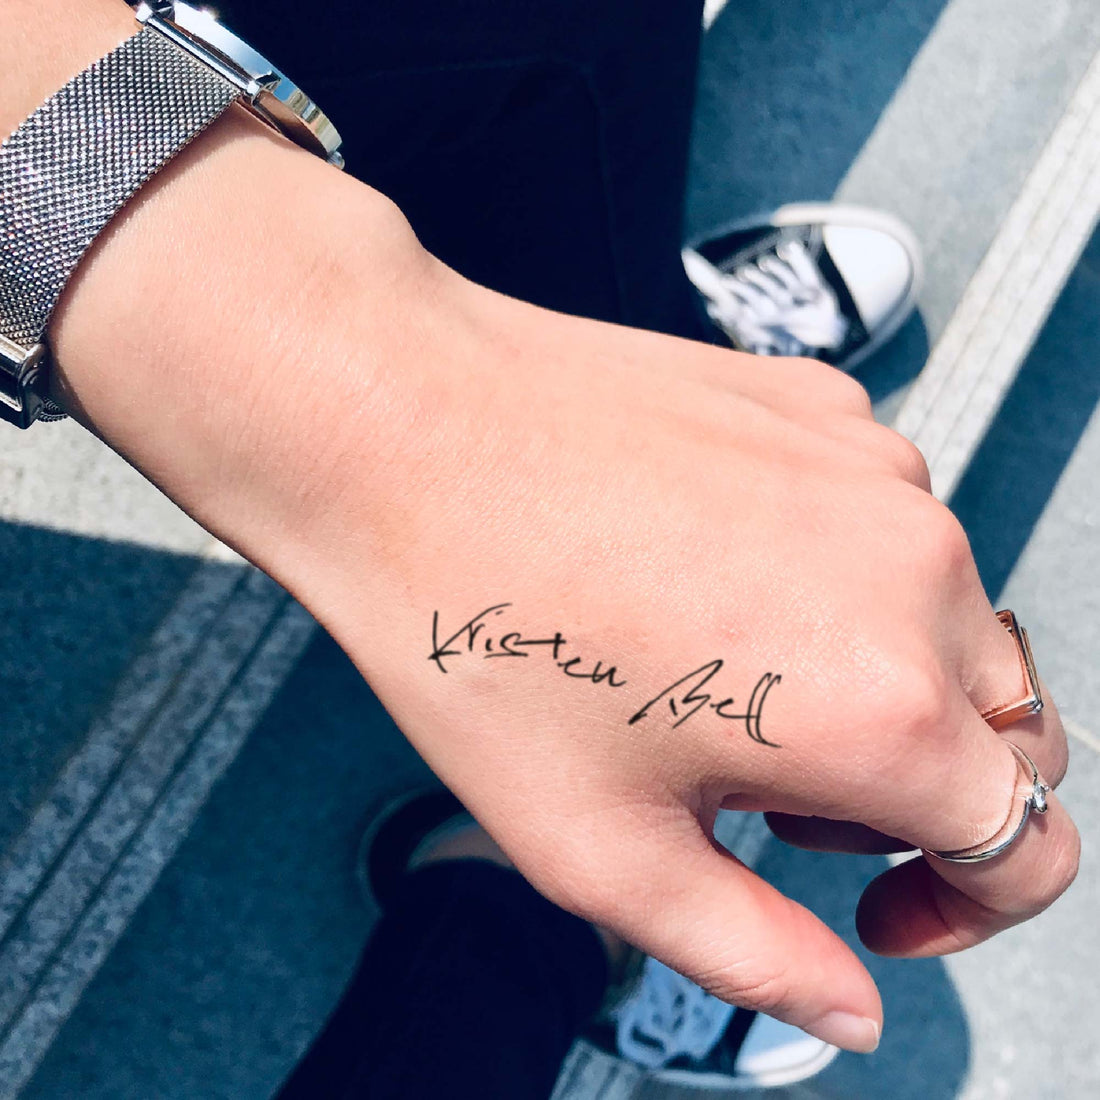 Kristen Bell custom temporary tattoo sticker design idea inspiration meanings removal arm wrist hand words font name signature calligraphy lyrics tour concert outfits merch accessory gift souvenir costumes wear dress up code